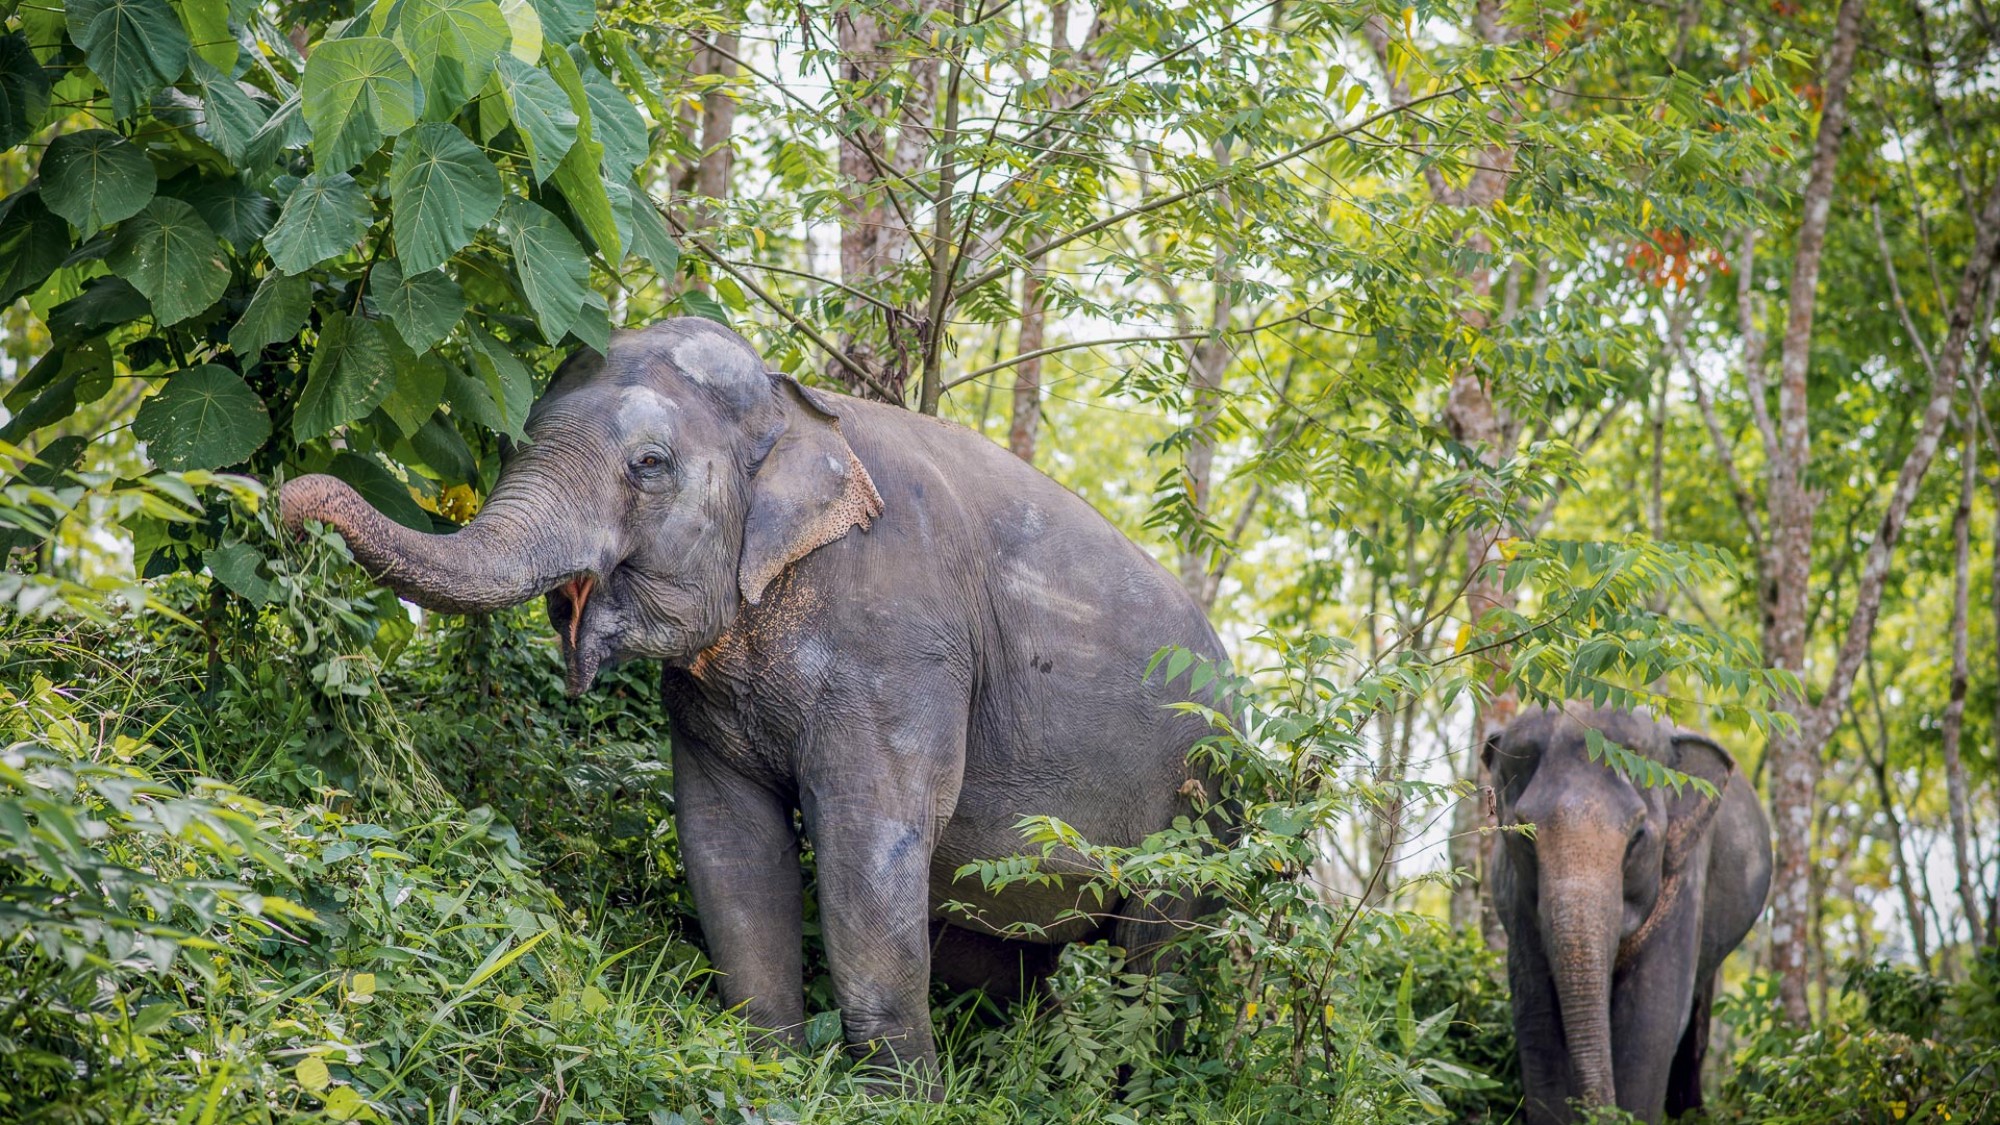 The Elephant In The Room How The Animal Tourism Industry Fuels Cruelty Amuse